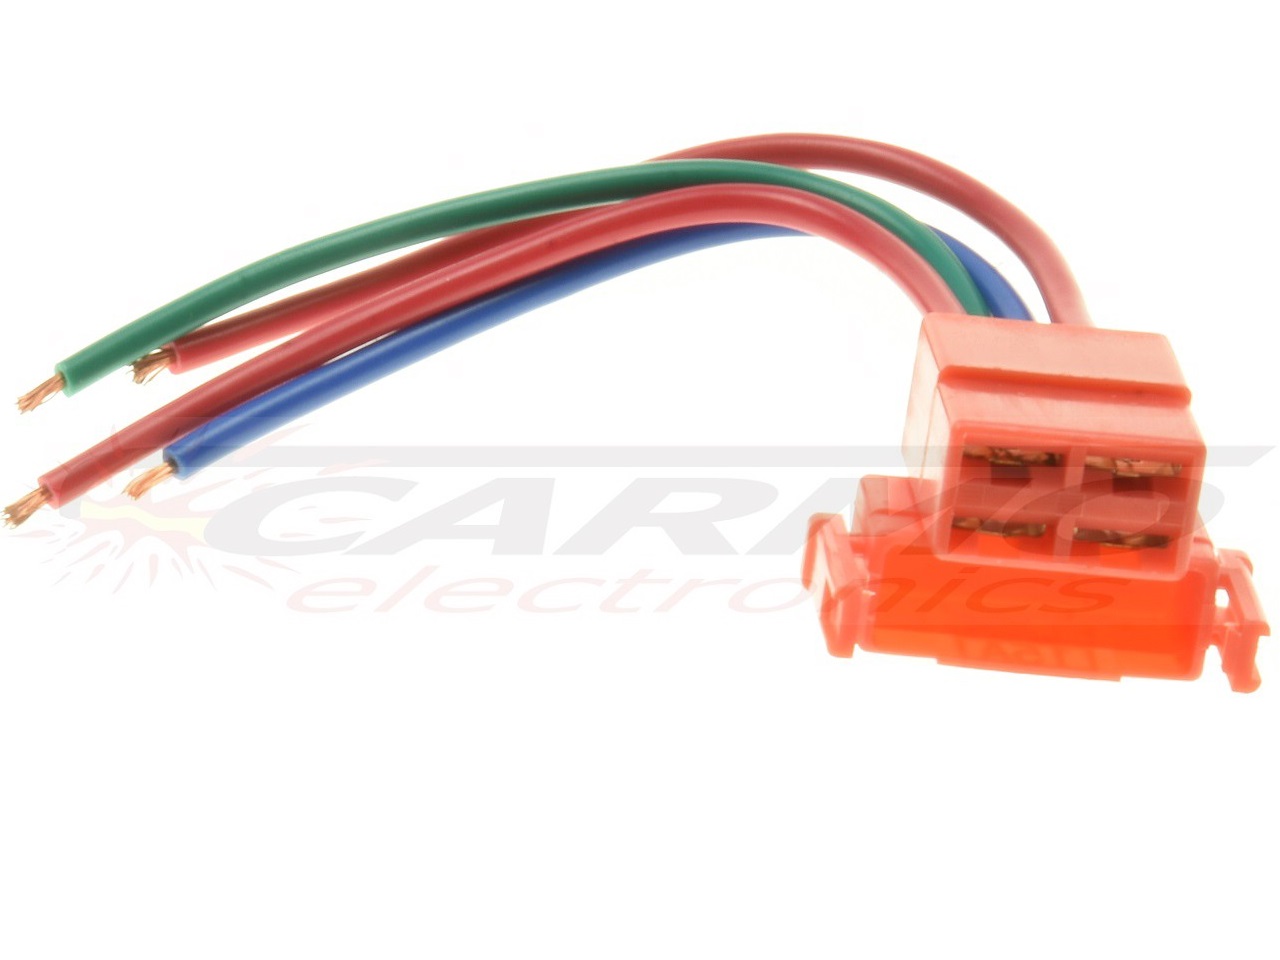 Honda Kawasaki starter relay connector - with wire - Click Image to Close